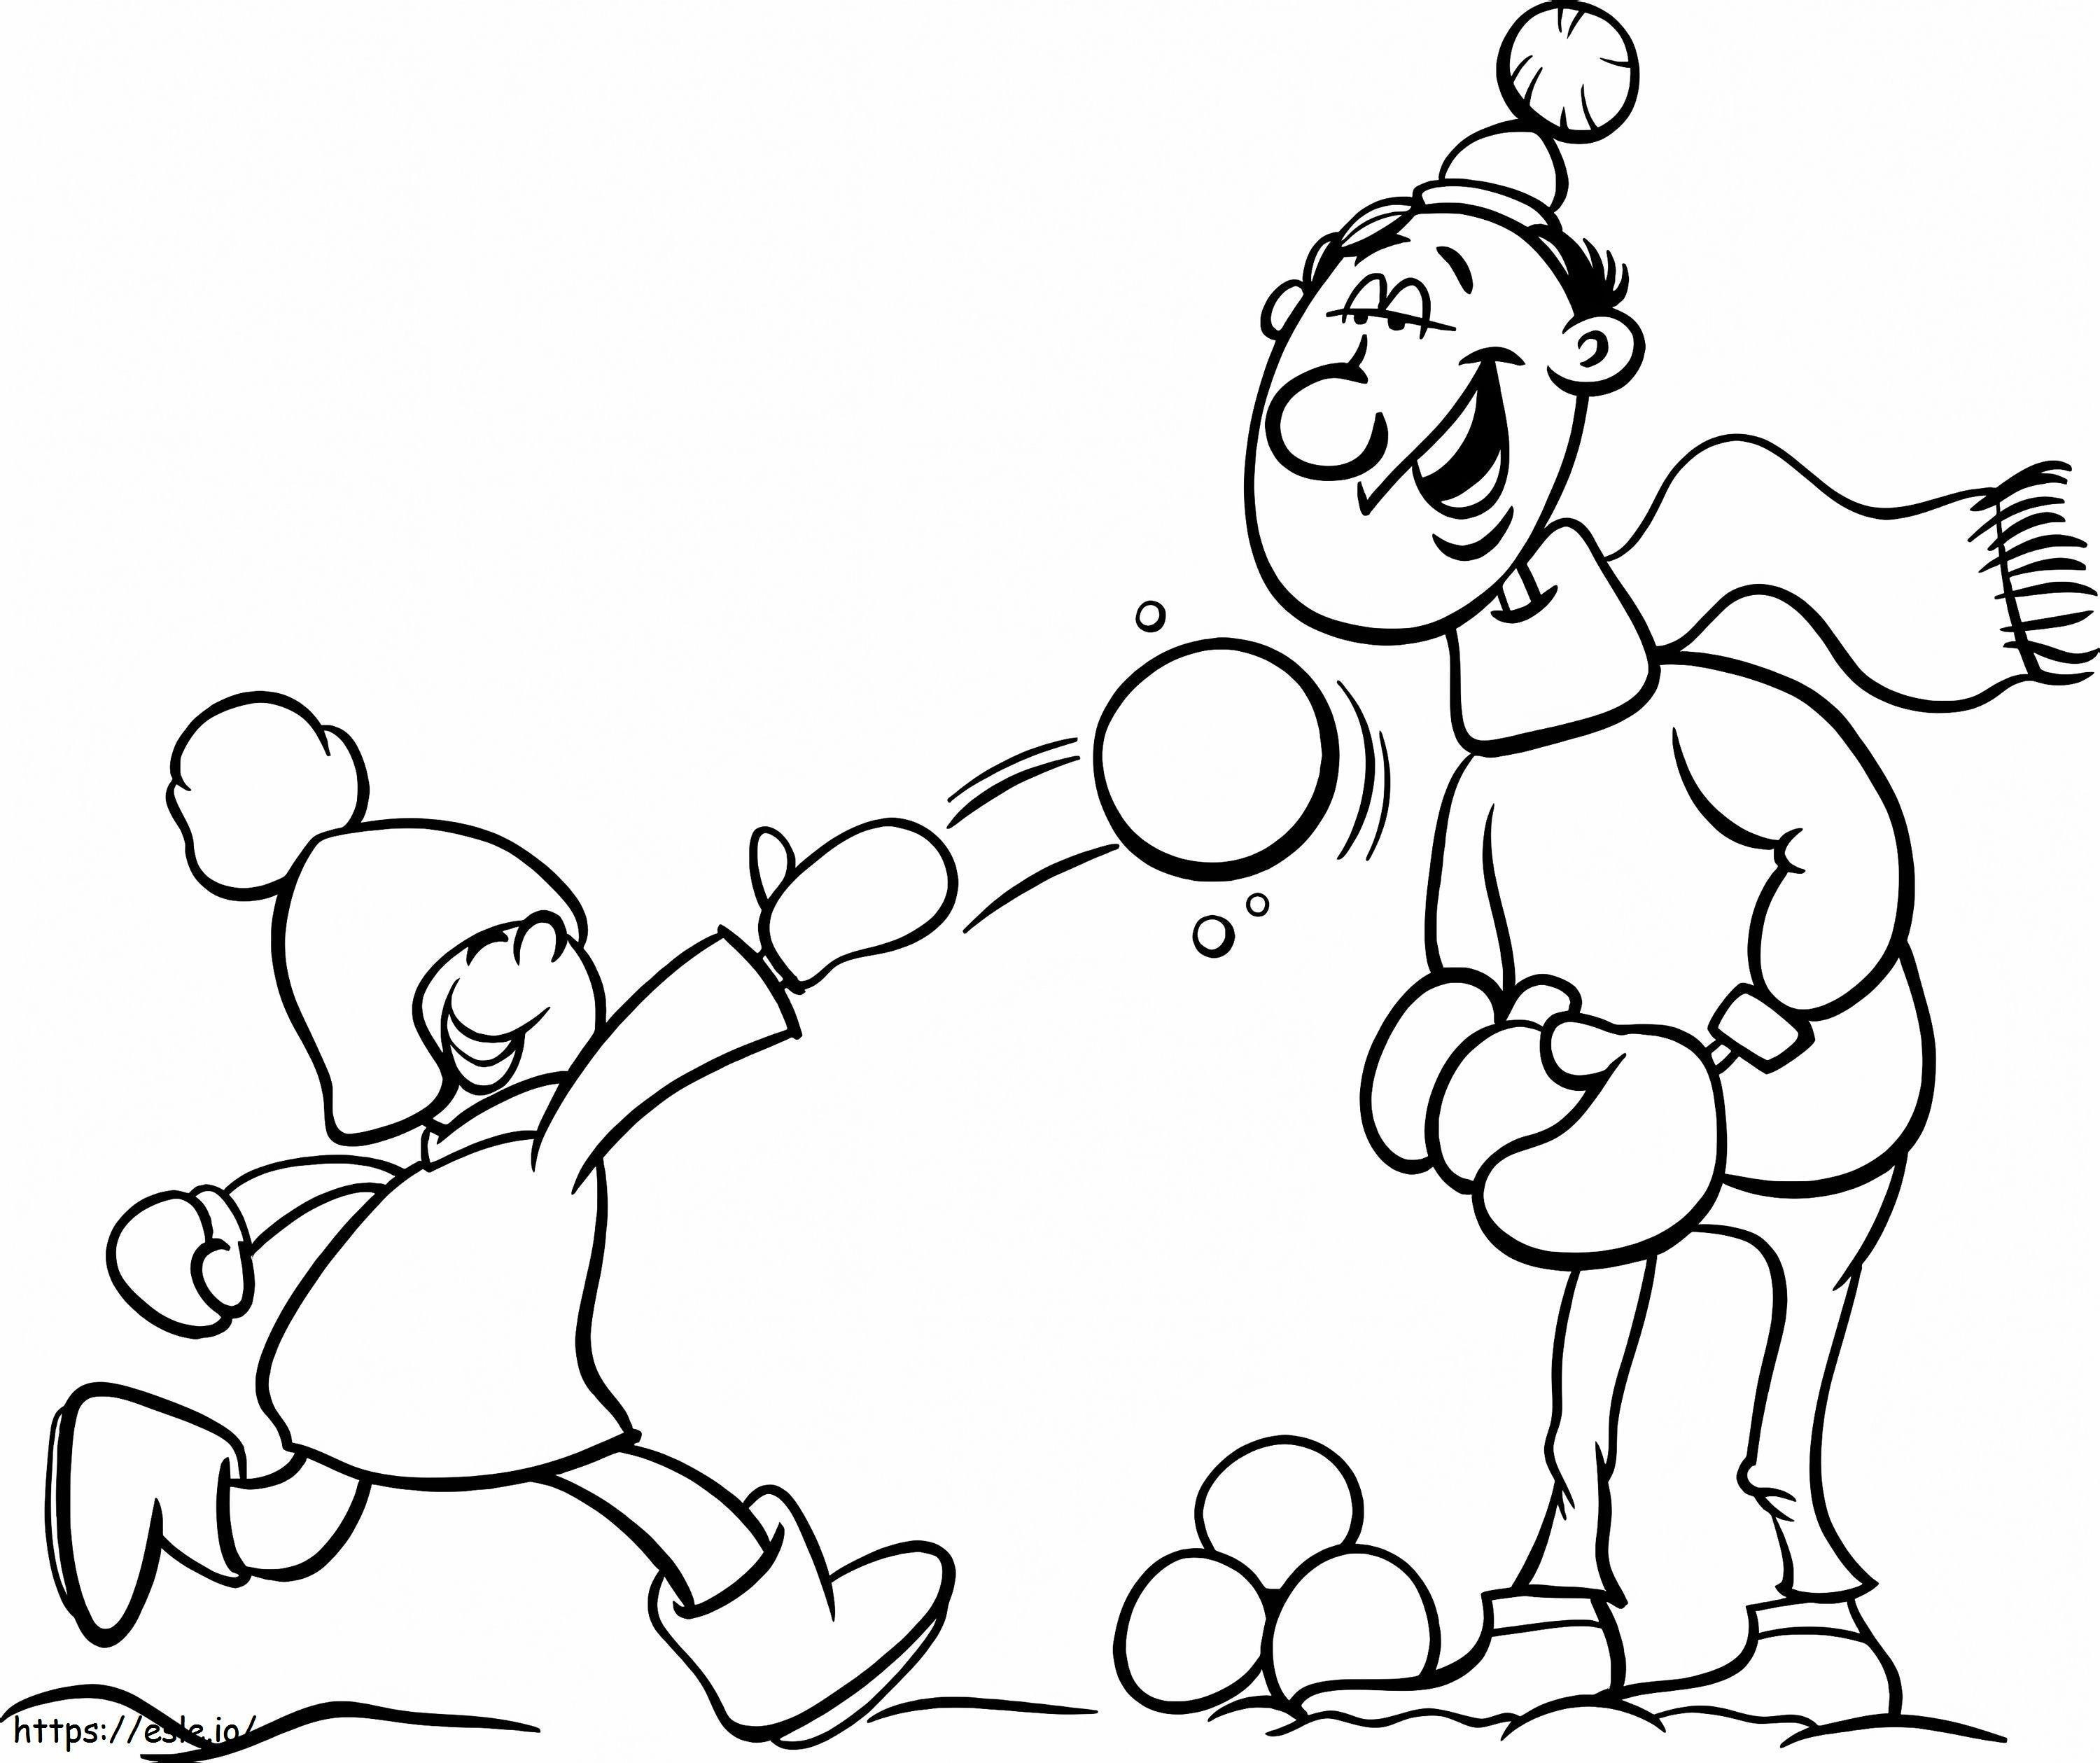 Snowball Fight With Dad coloring page